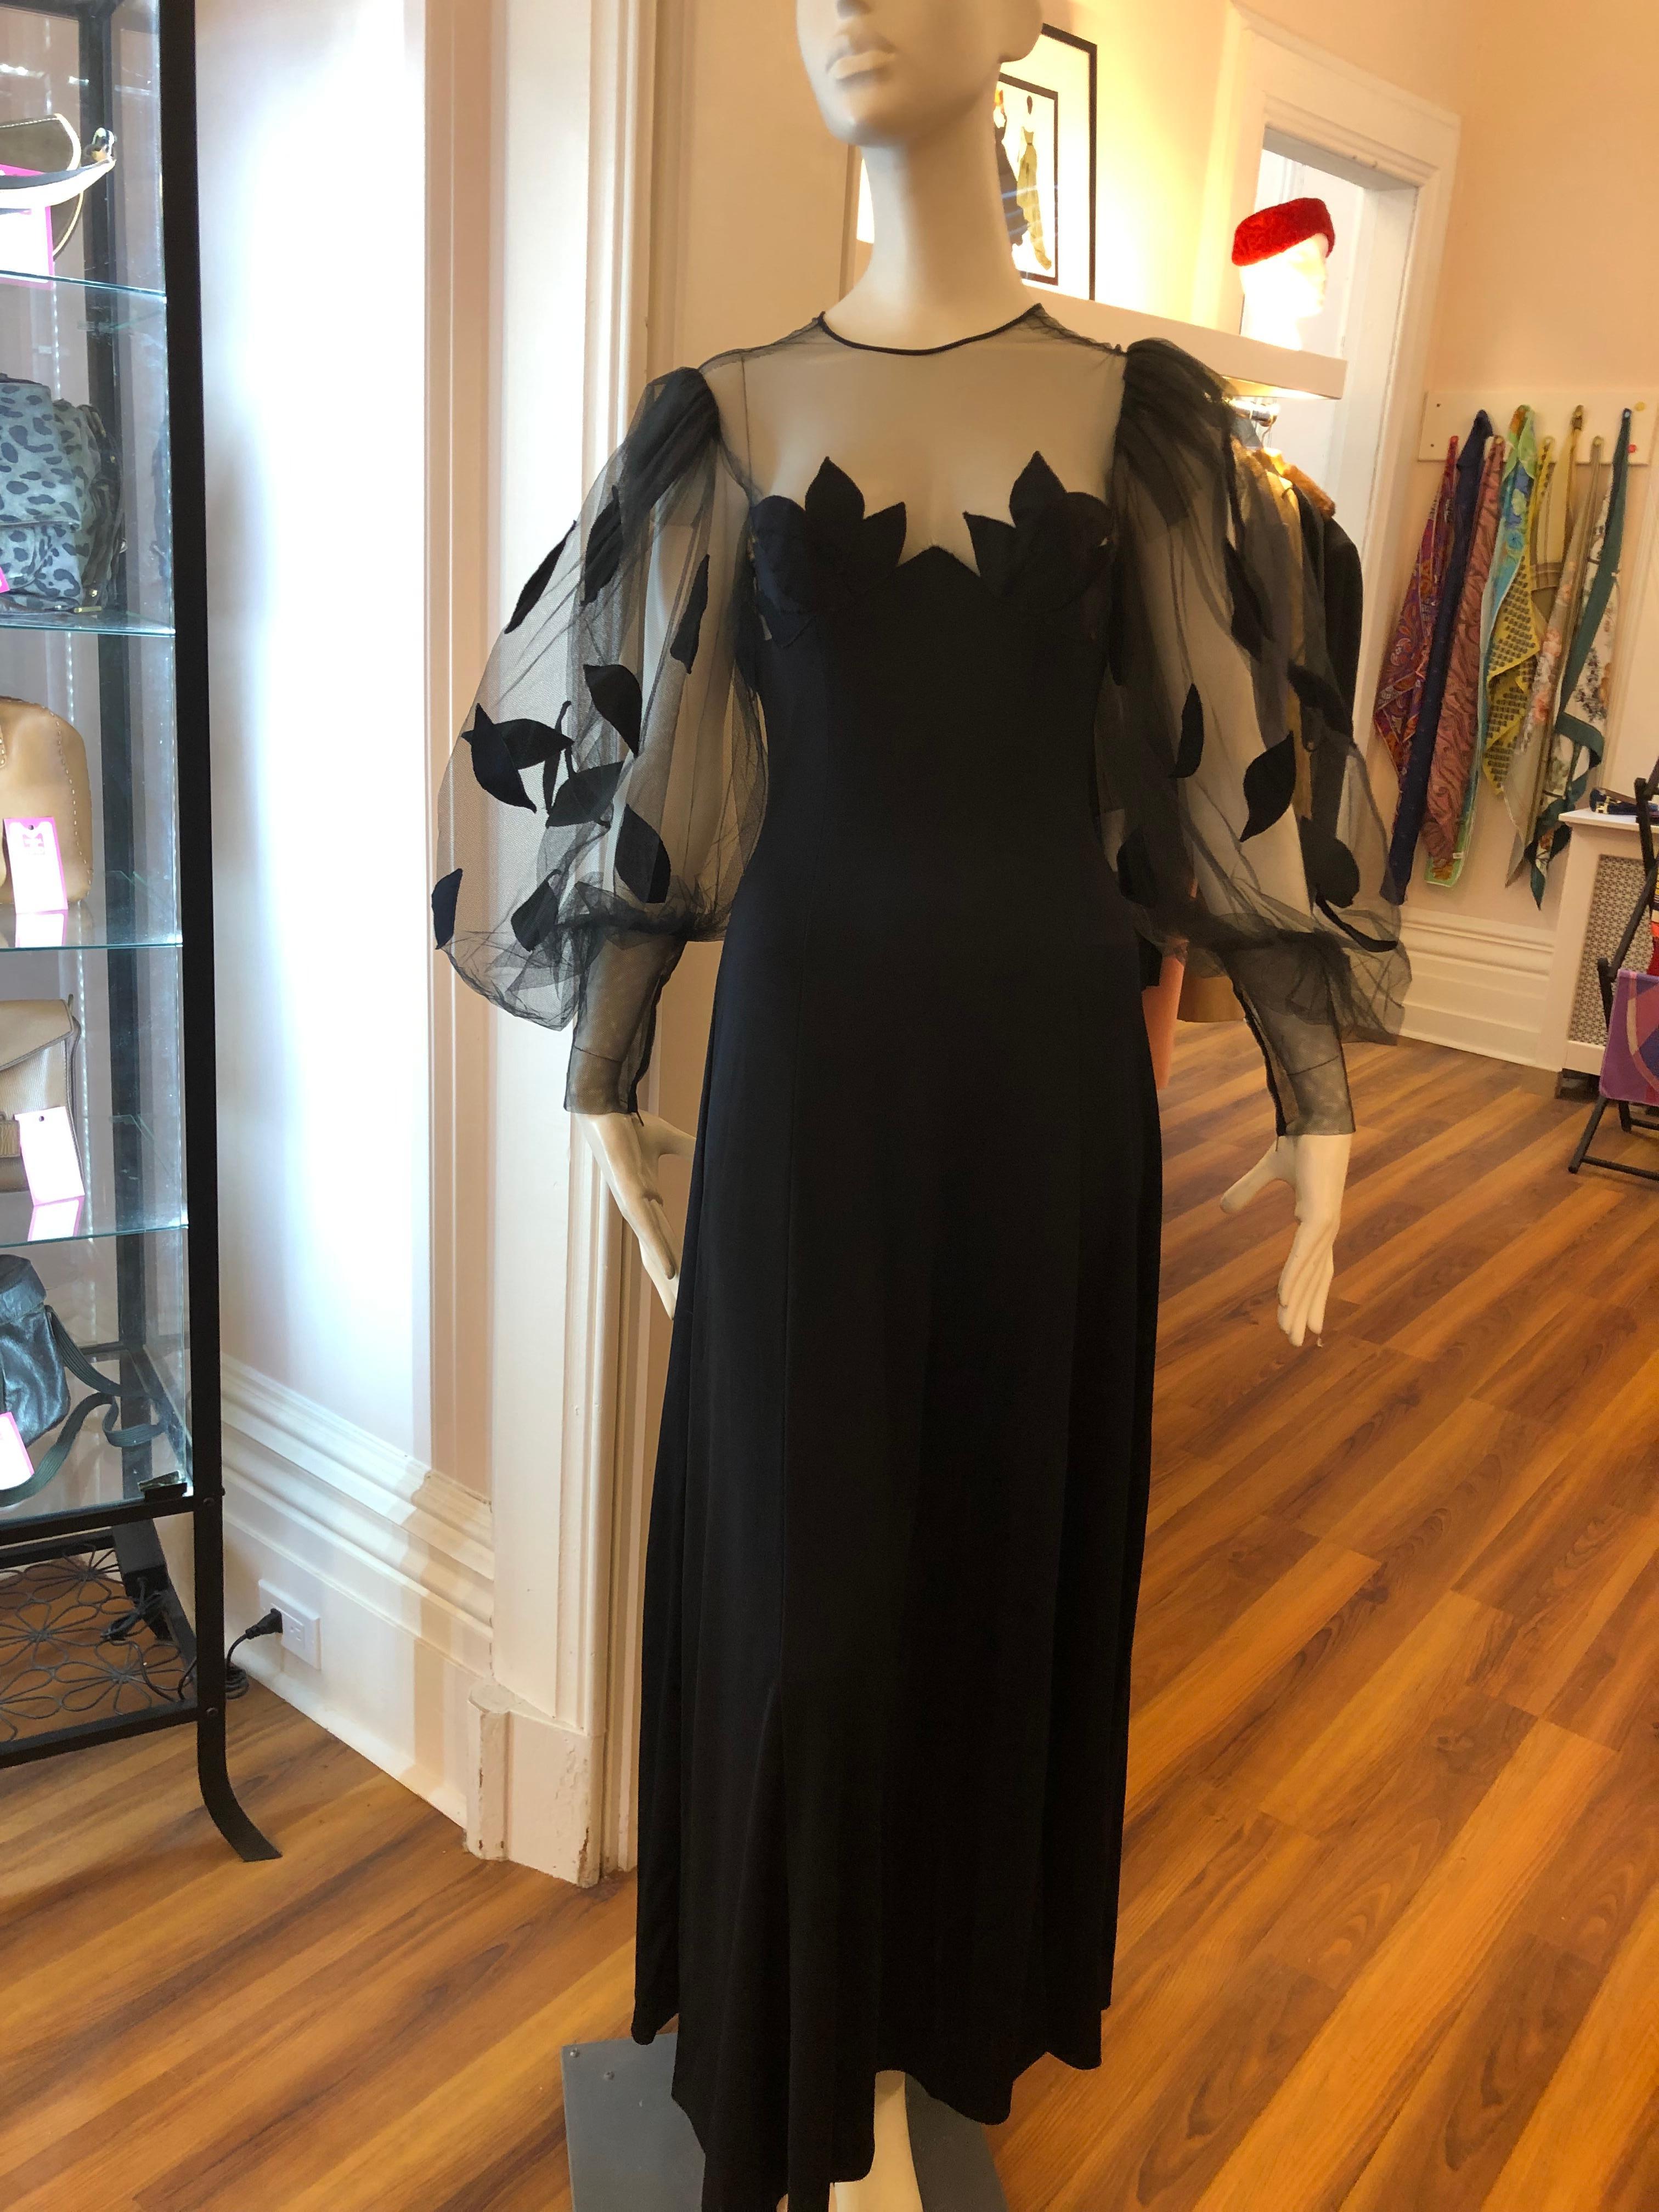 This black Loris Azzaro vintage gown has wonderful detail from the stretch jersey to the net with applique, and the balloon sleeves narrowing to the cuffs which are zippered.

The back is net sheer to under the bust line and has a discreet zipper